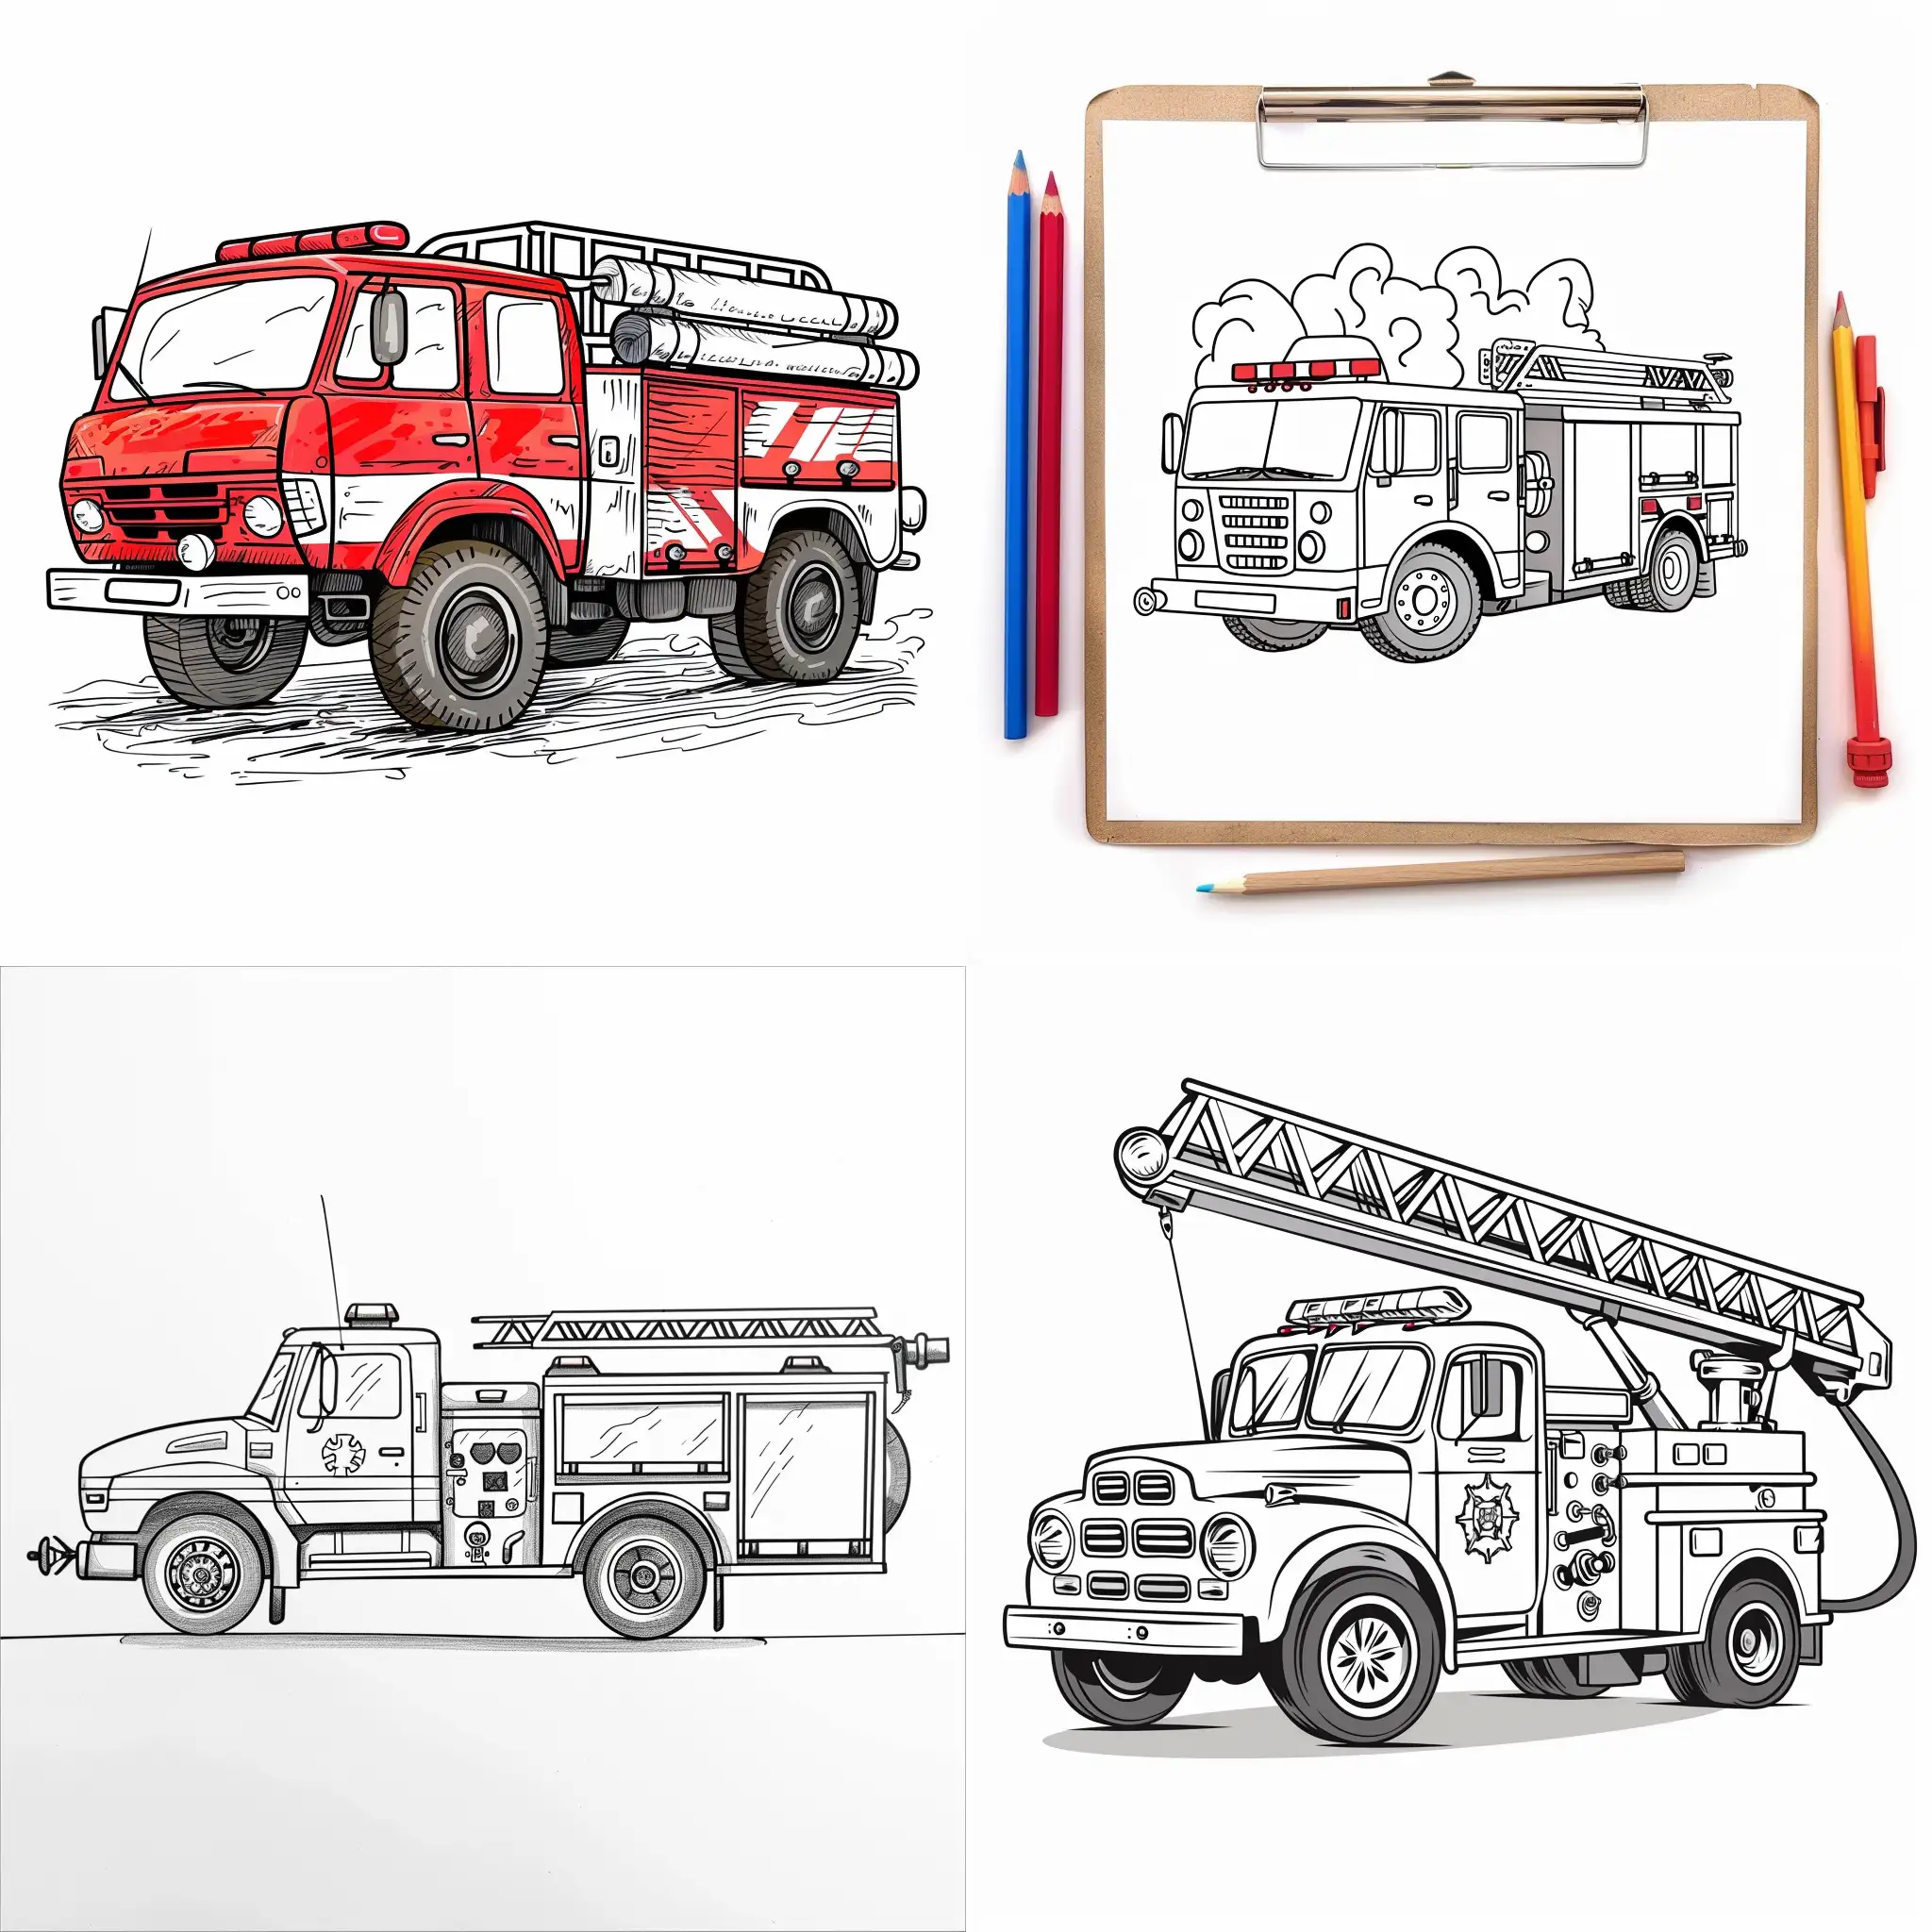 Draw a nice and simple FIRE TRUCK for a coloring book for young children, without gray scales, on a white sheet of paper with a plain background without drawings. The FIRE TRUCK should have a nice and friendly appearance.